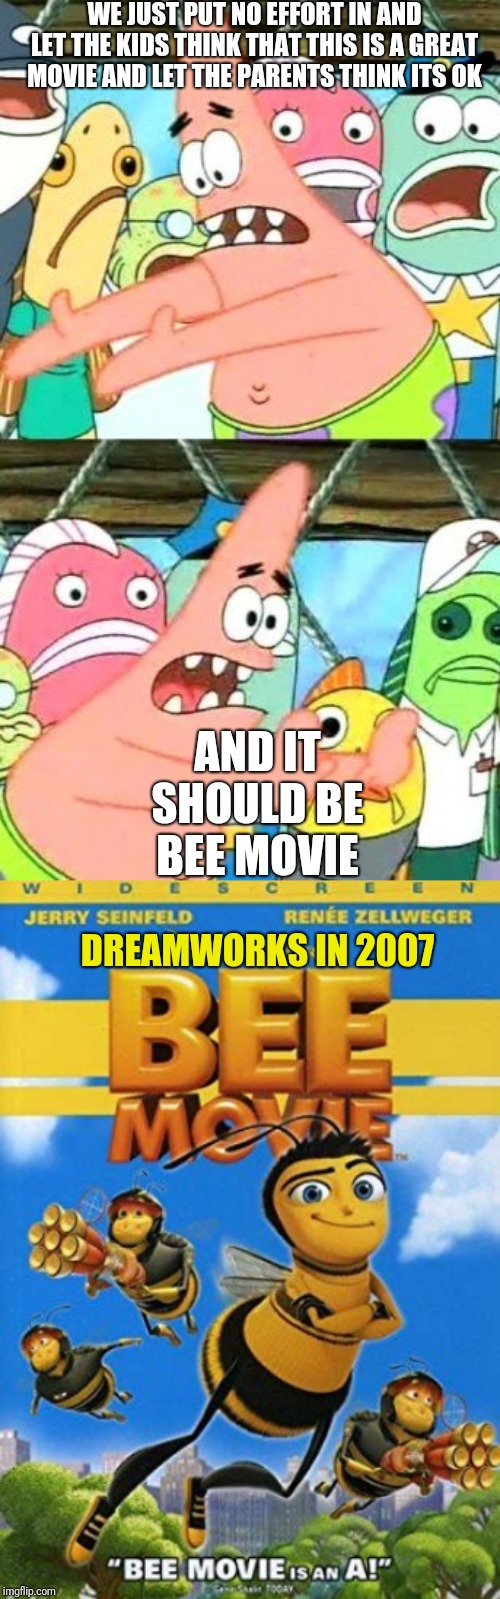 DreamWorks creating a meme movie in 2007 | WE JUST PUT NO EFFORT IN AND LET THE KIDS THINK THAT THIS IS A GREAT MOVIE AND LET THE PARENTS THINK ITS OK; AND IT SHOULD BE BEE MOVIE; DREAMWORKS IN 2007 | image tagged in memes,put it somewhere else patrick,bee movie | made w/ Imgflip meme maker